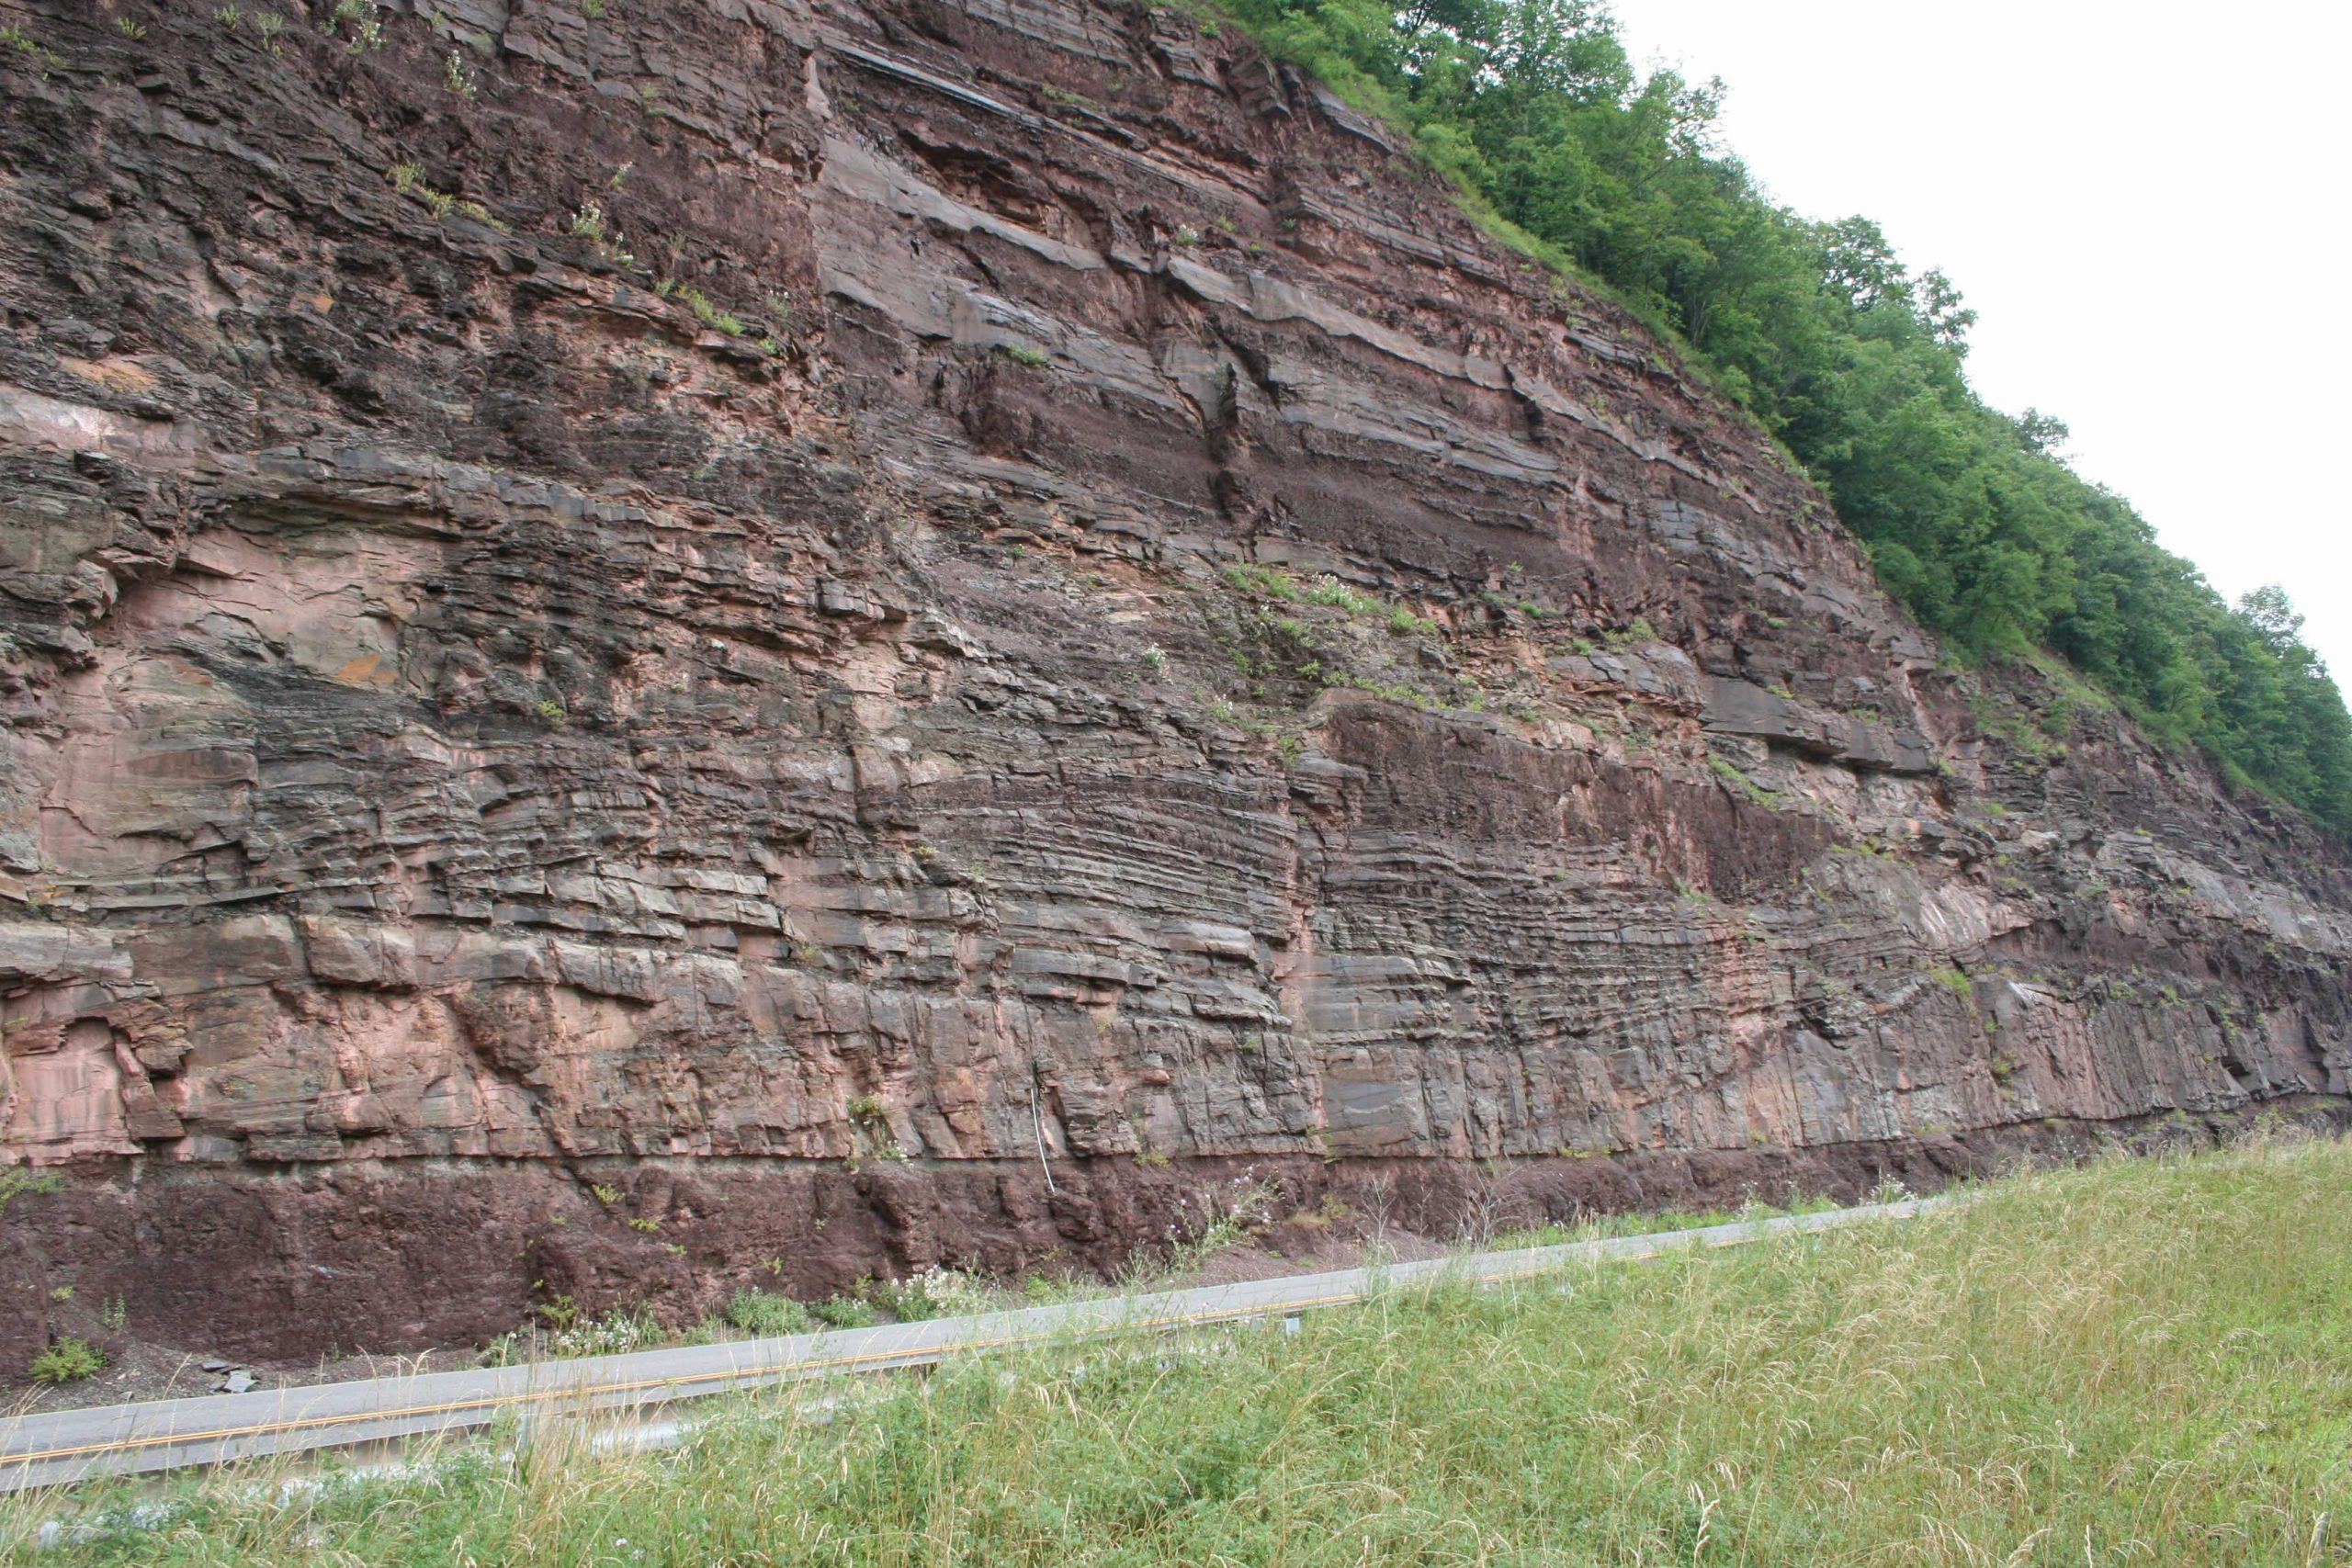 Point bar deposits in the Hampshire Formation near North Bend, Pennsylvania